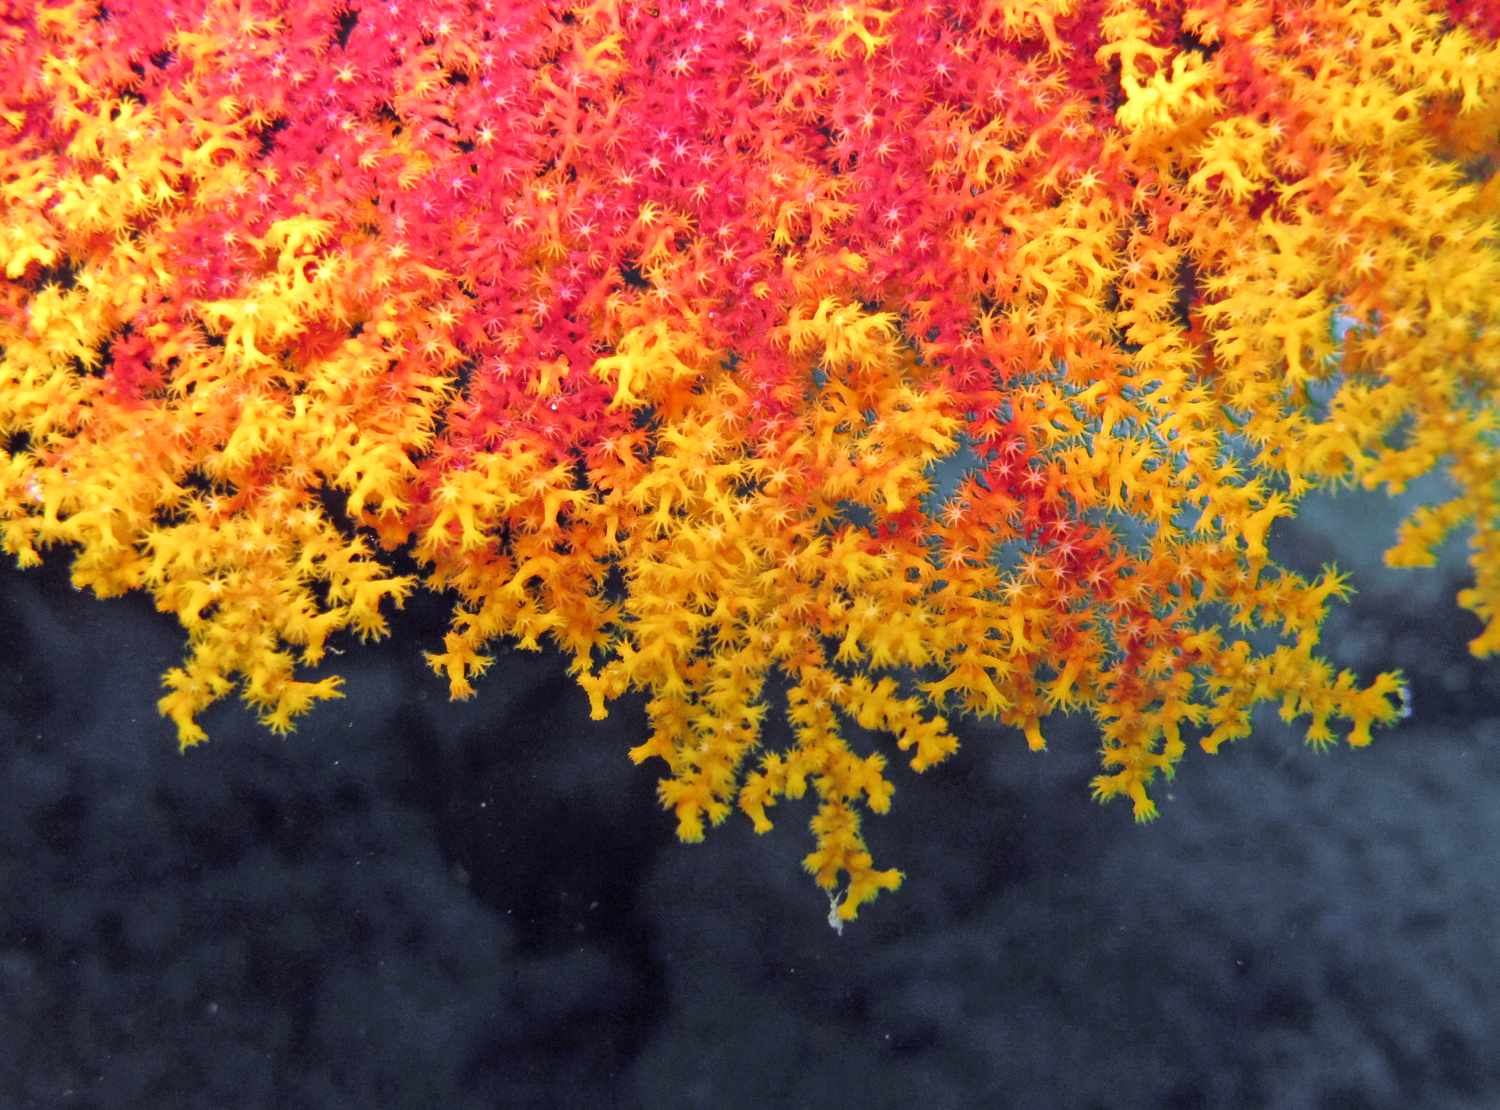 A bright red and yellow piece of coral